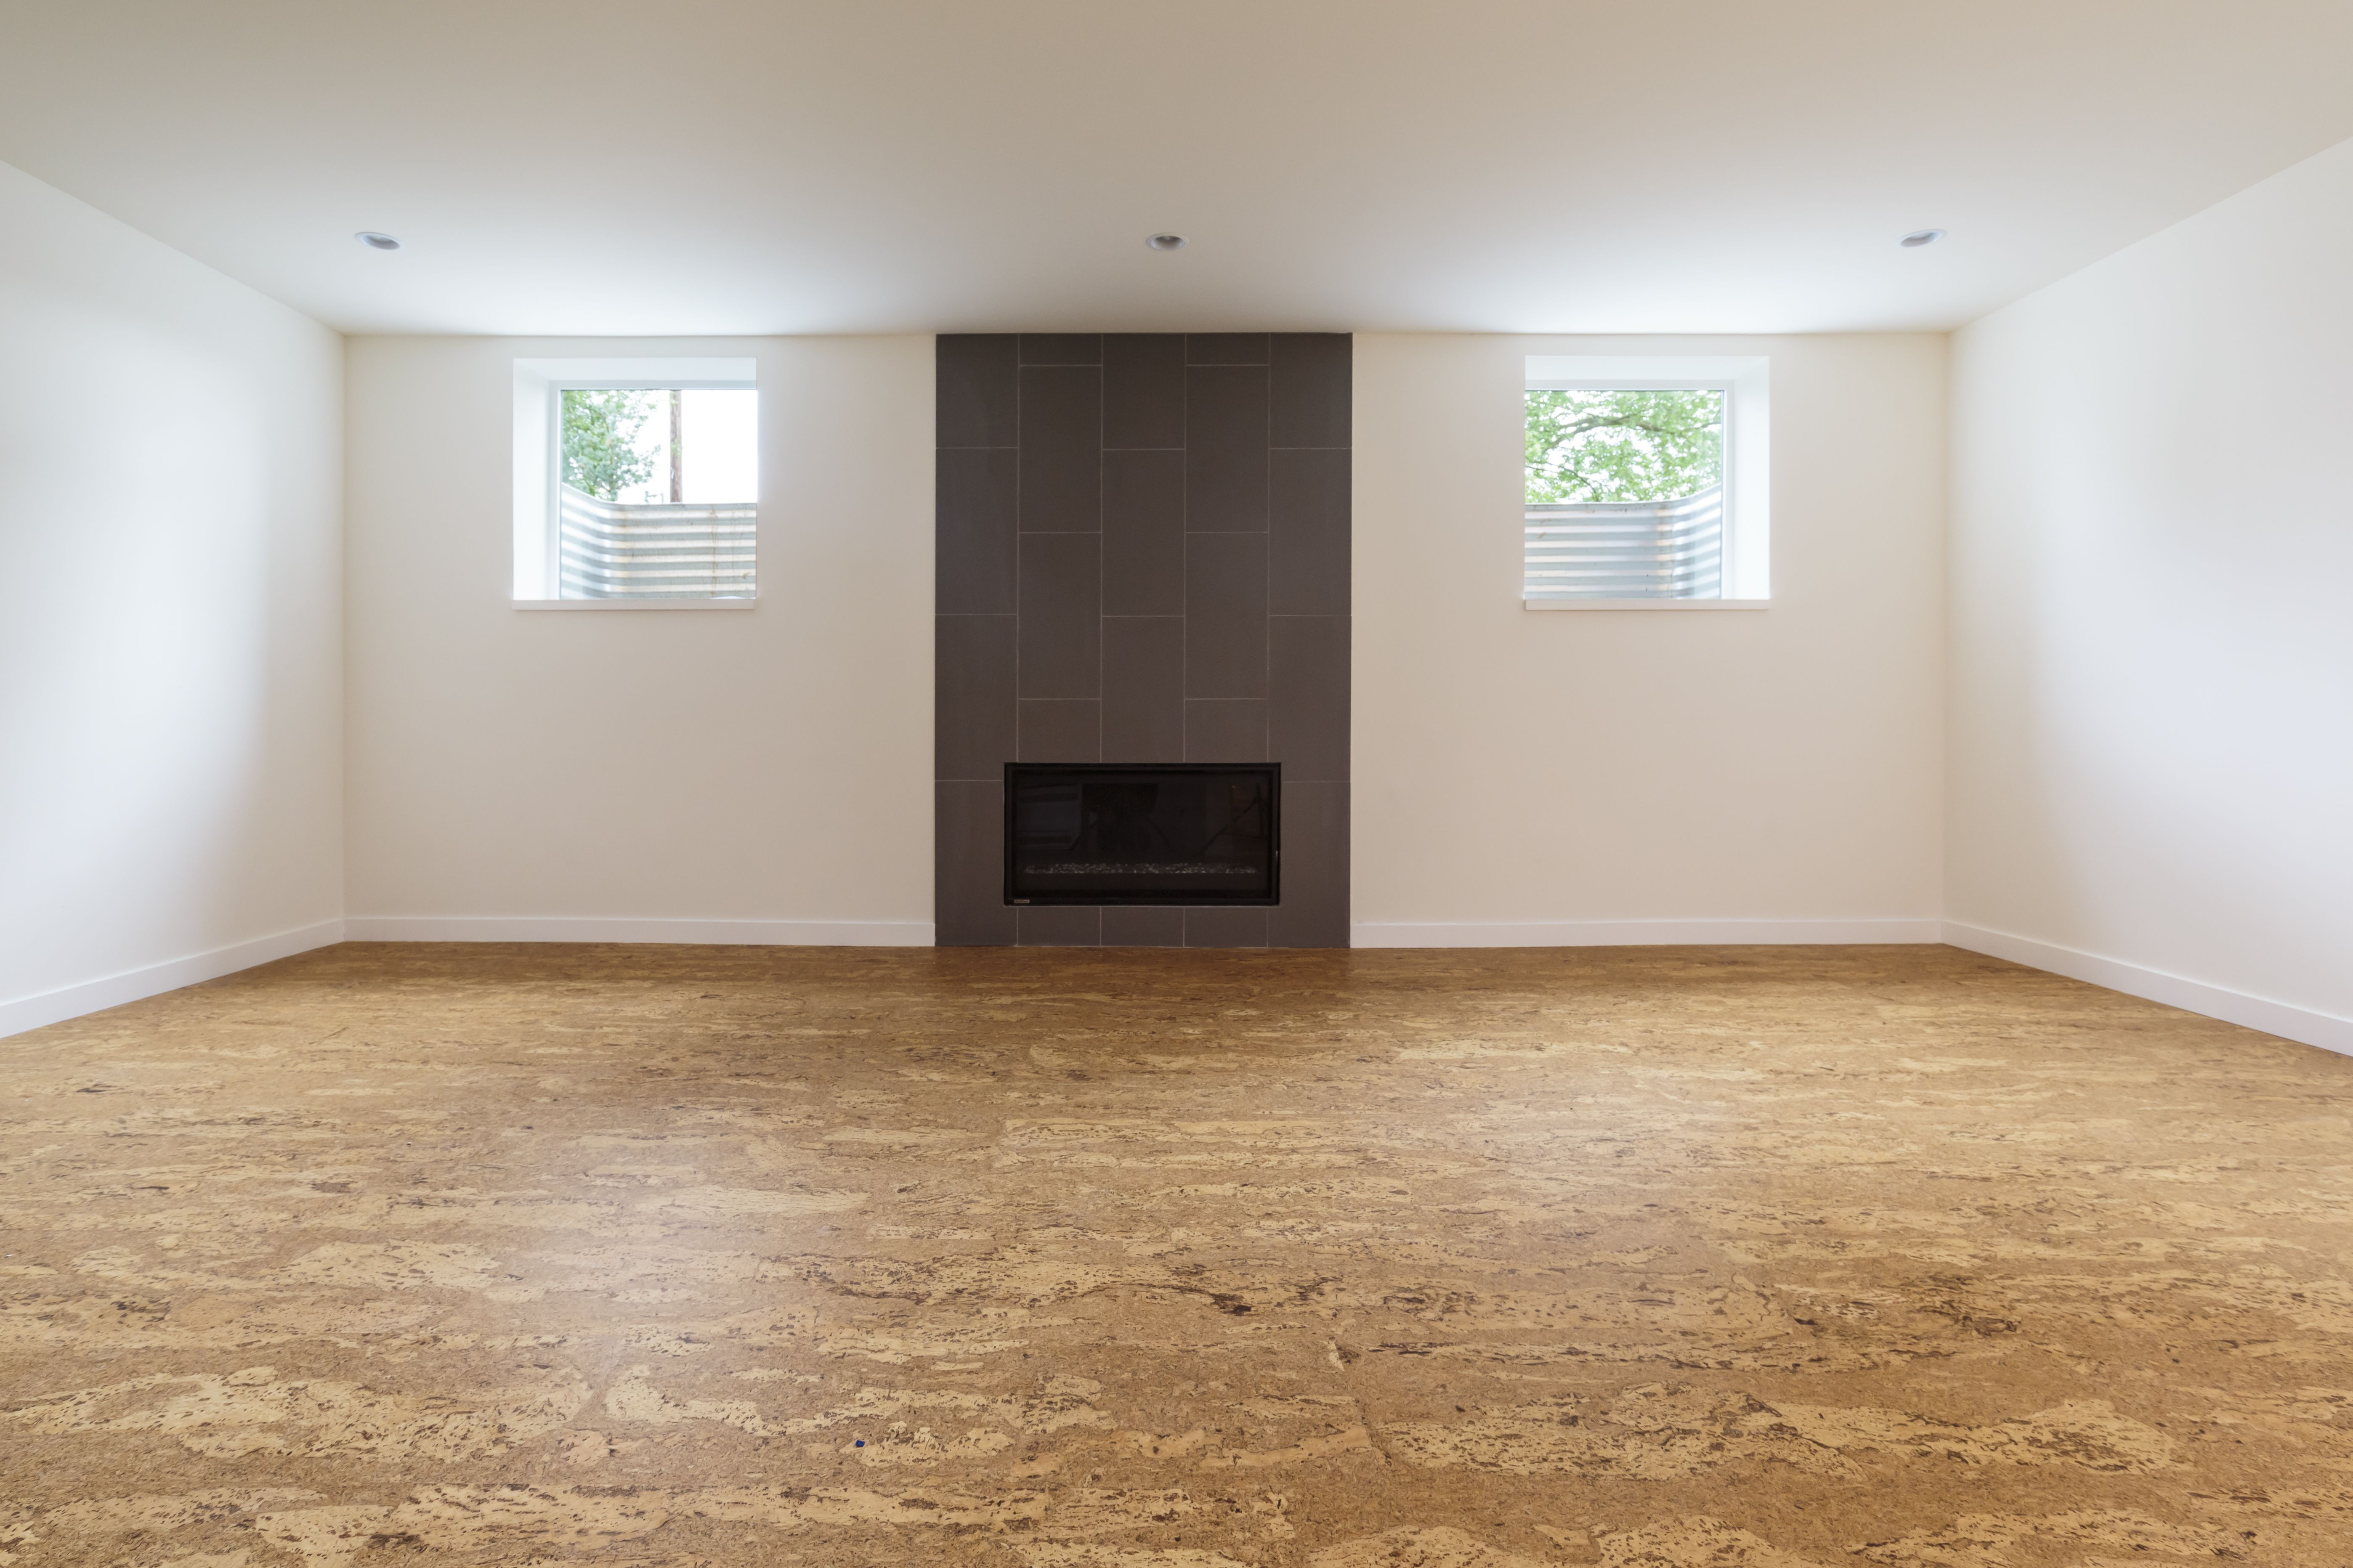 19 Fabulous Cost Of Hardwood Floors Compared to Carpet 2024 free download cost of hardwood floors compared to carpet of the best flooring options for senior citizens intended for cork flooring in an unfurnished home